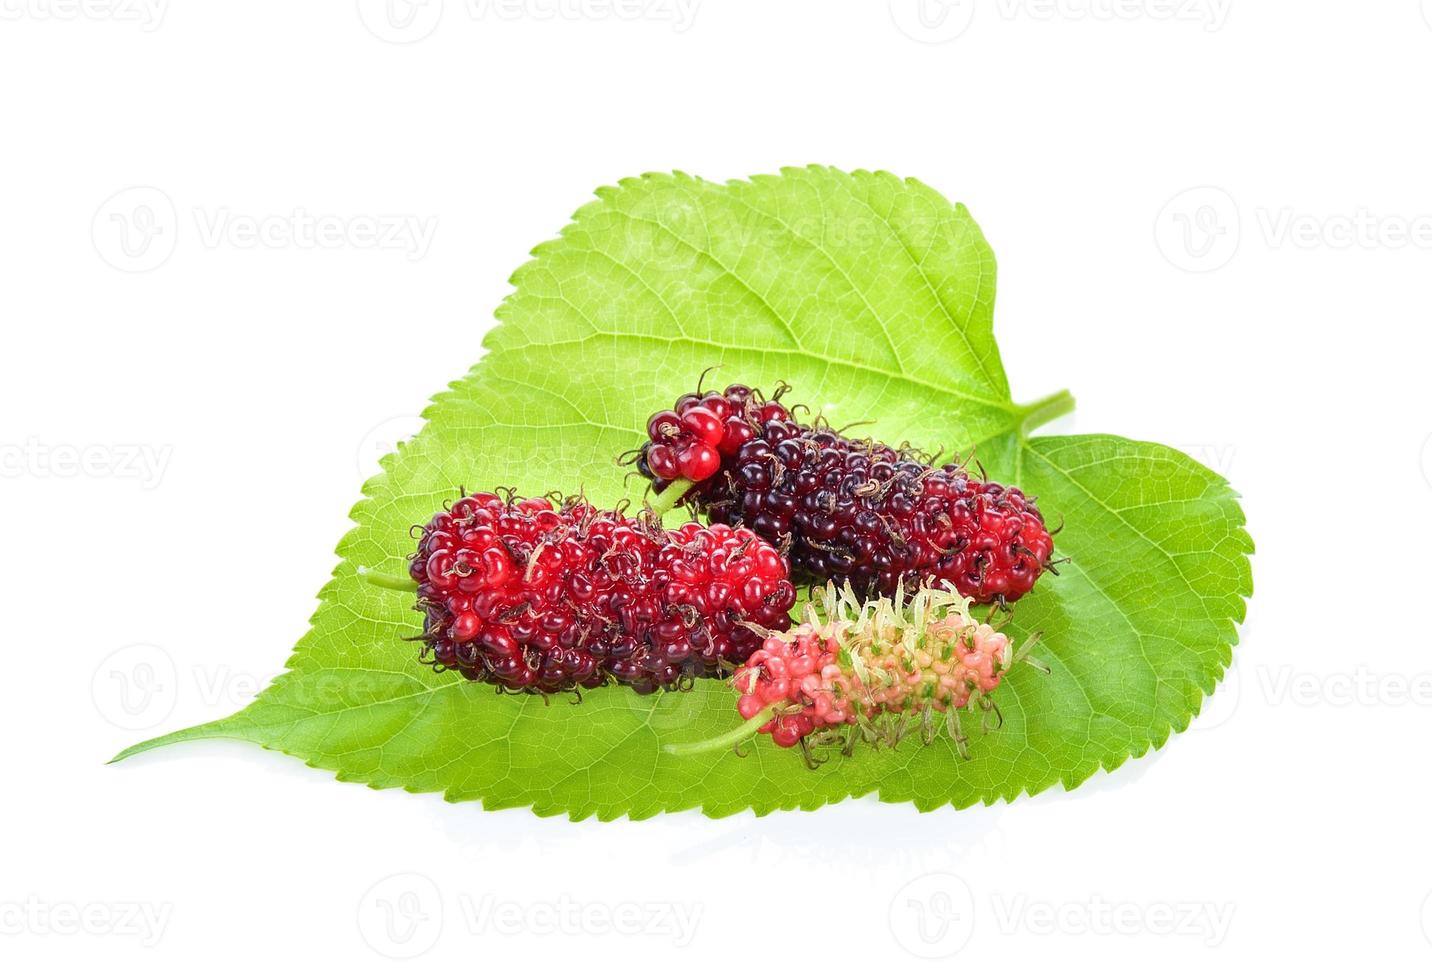 Mulberry on white background photo